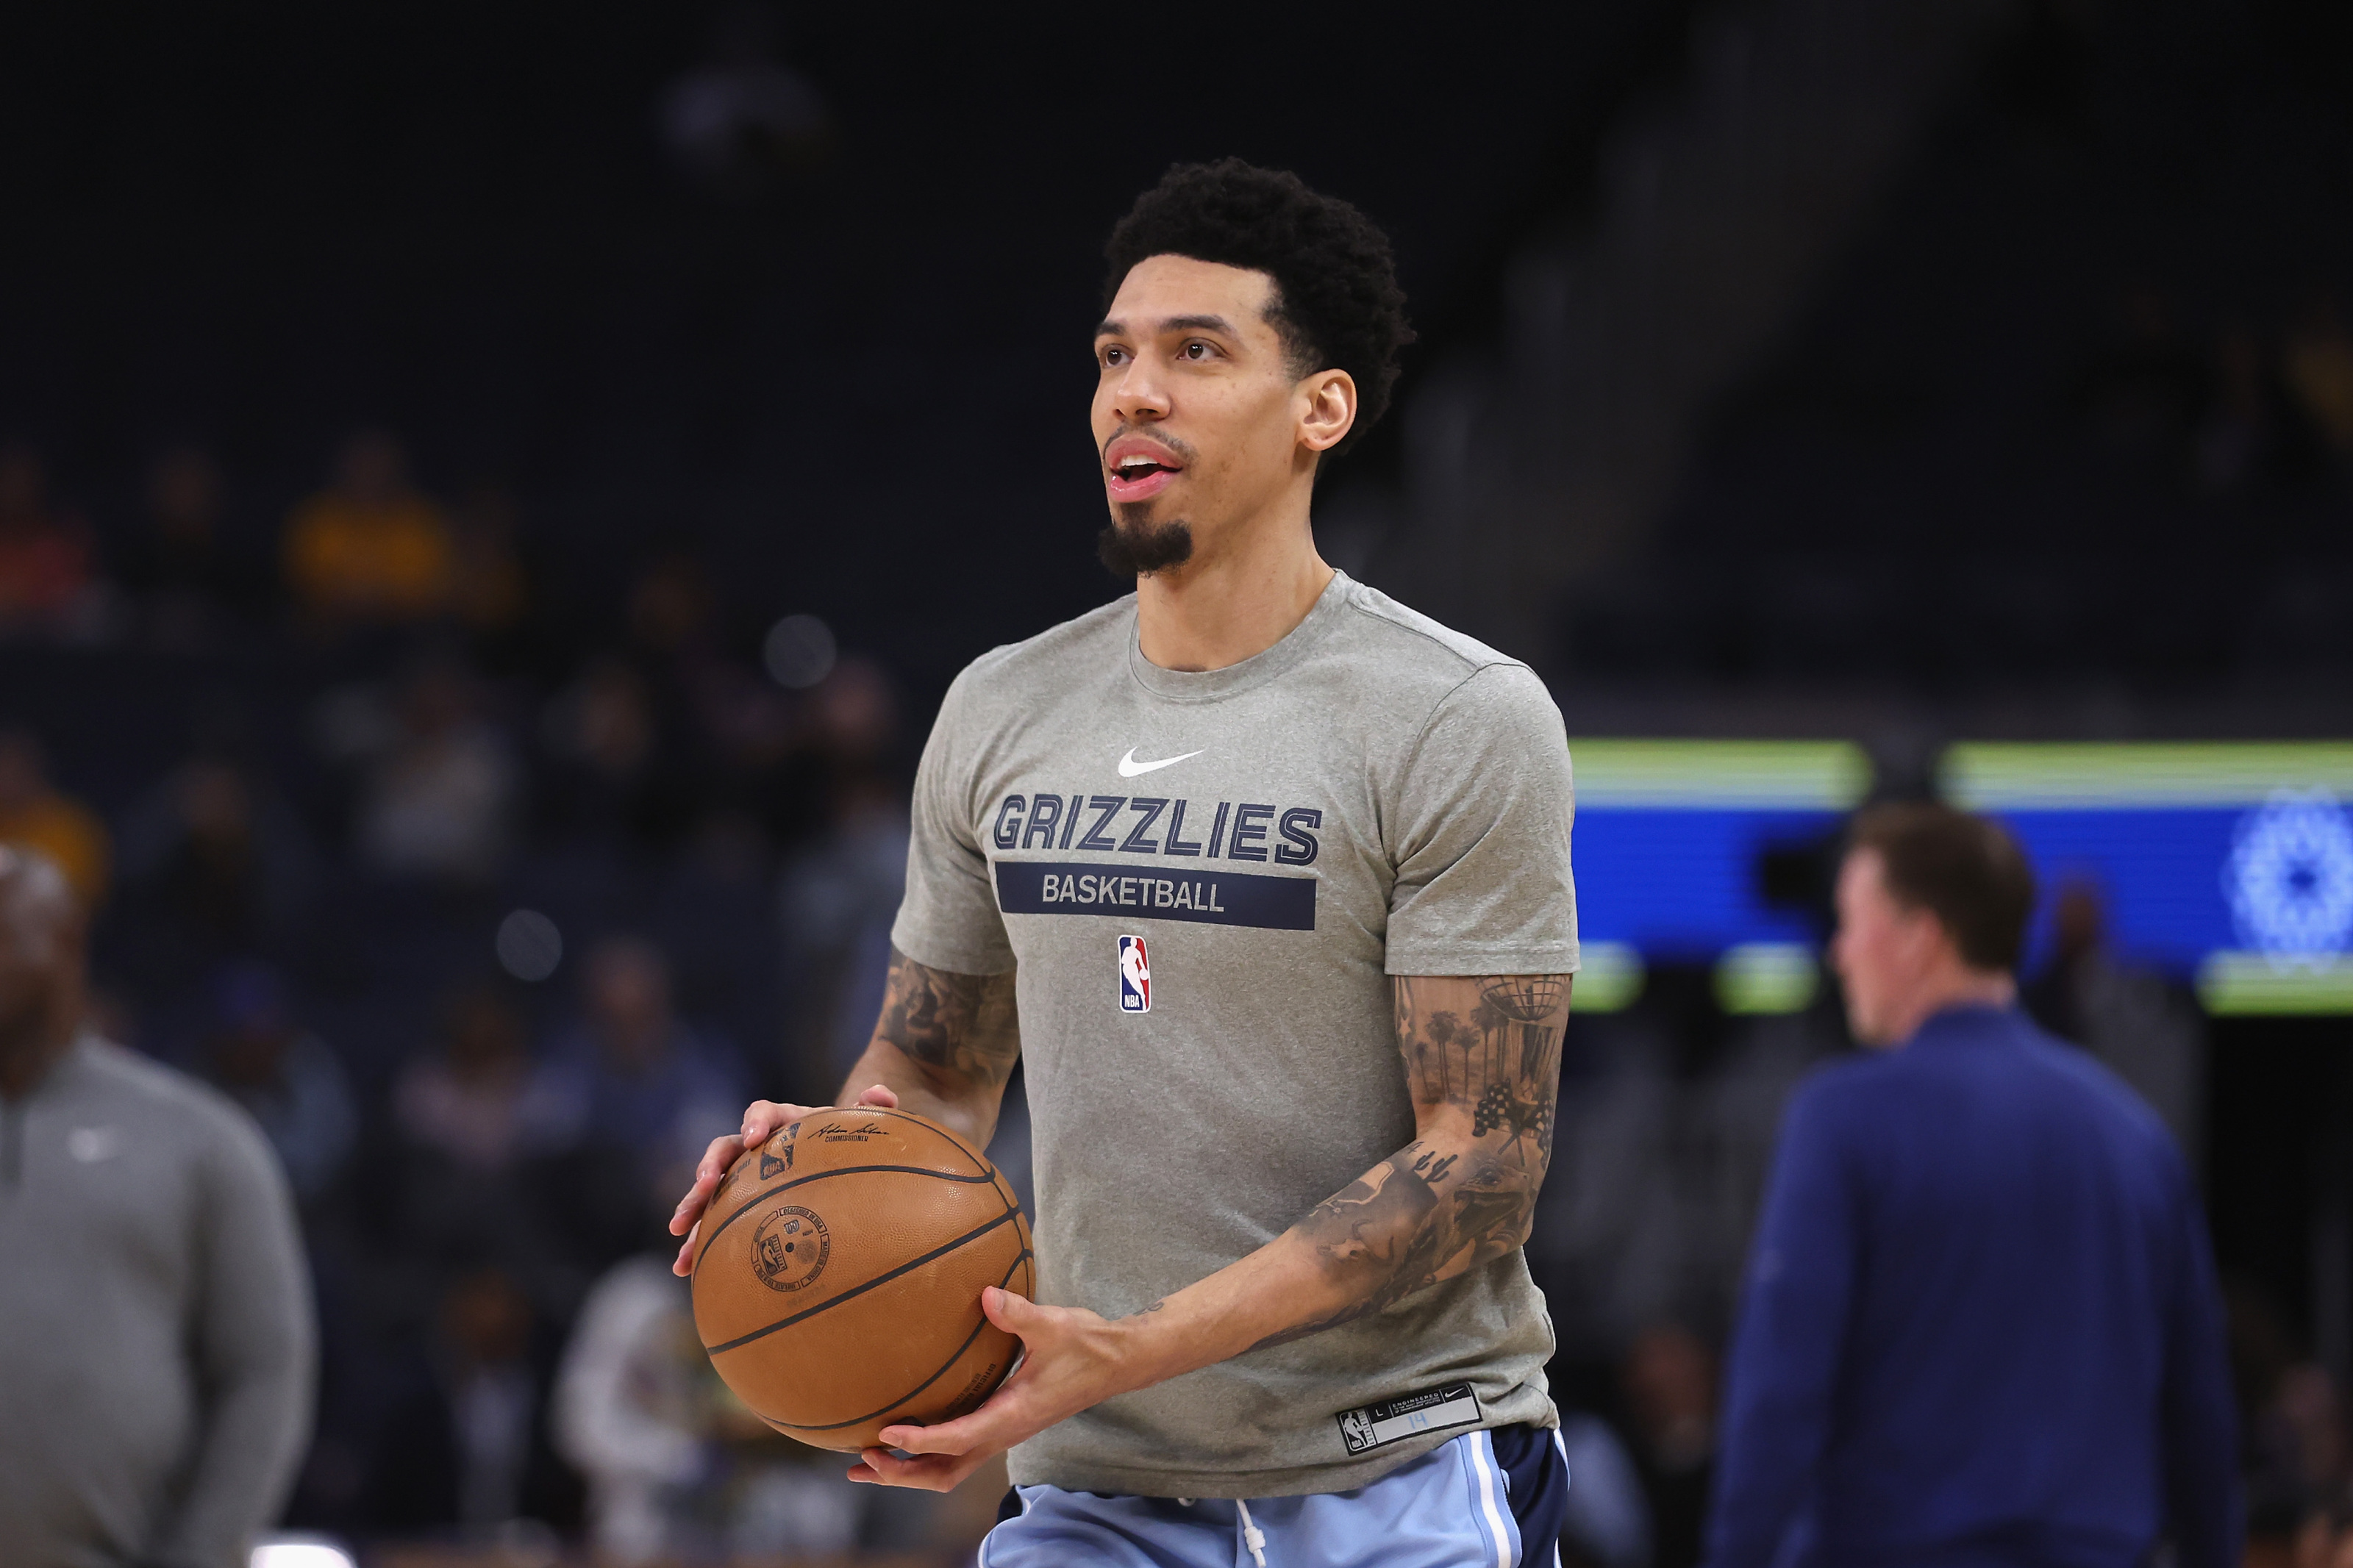 NBA - Danny Green helps lead the Cleveland Cavaliers to